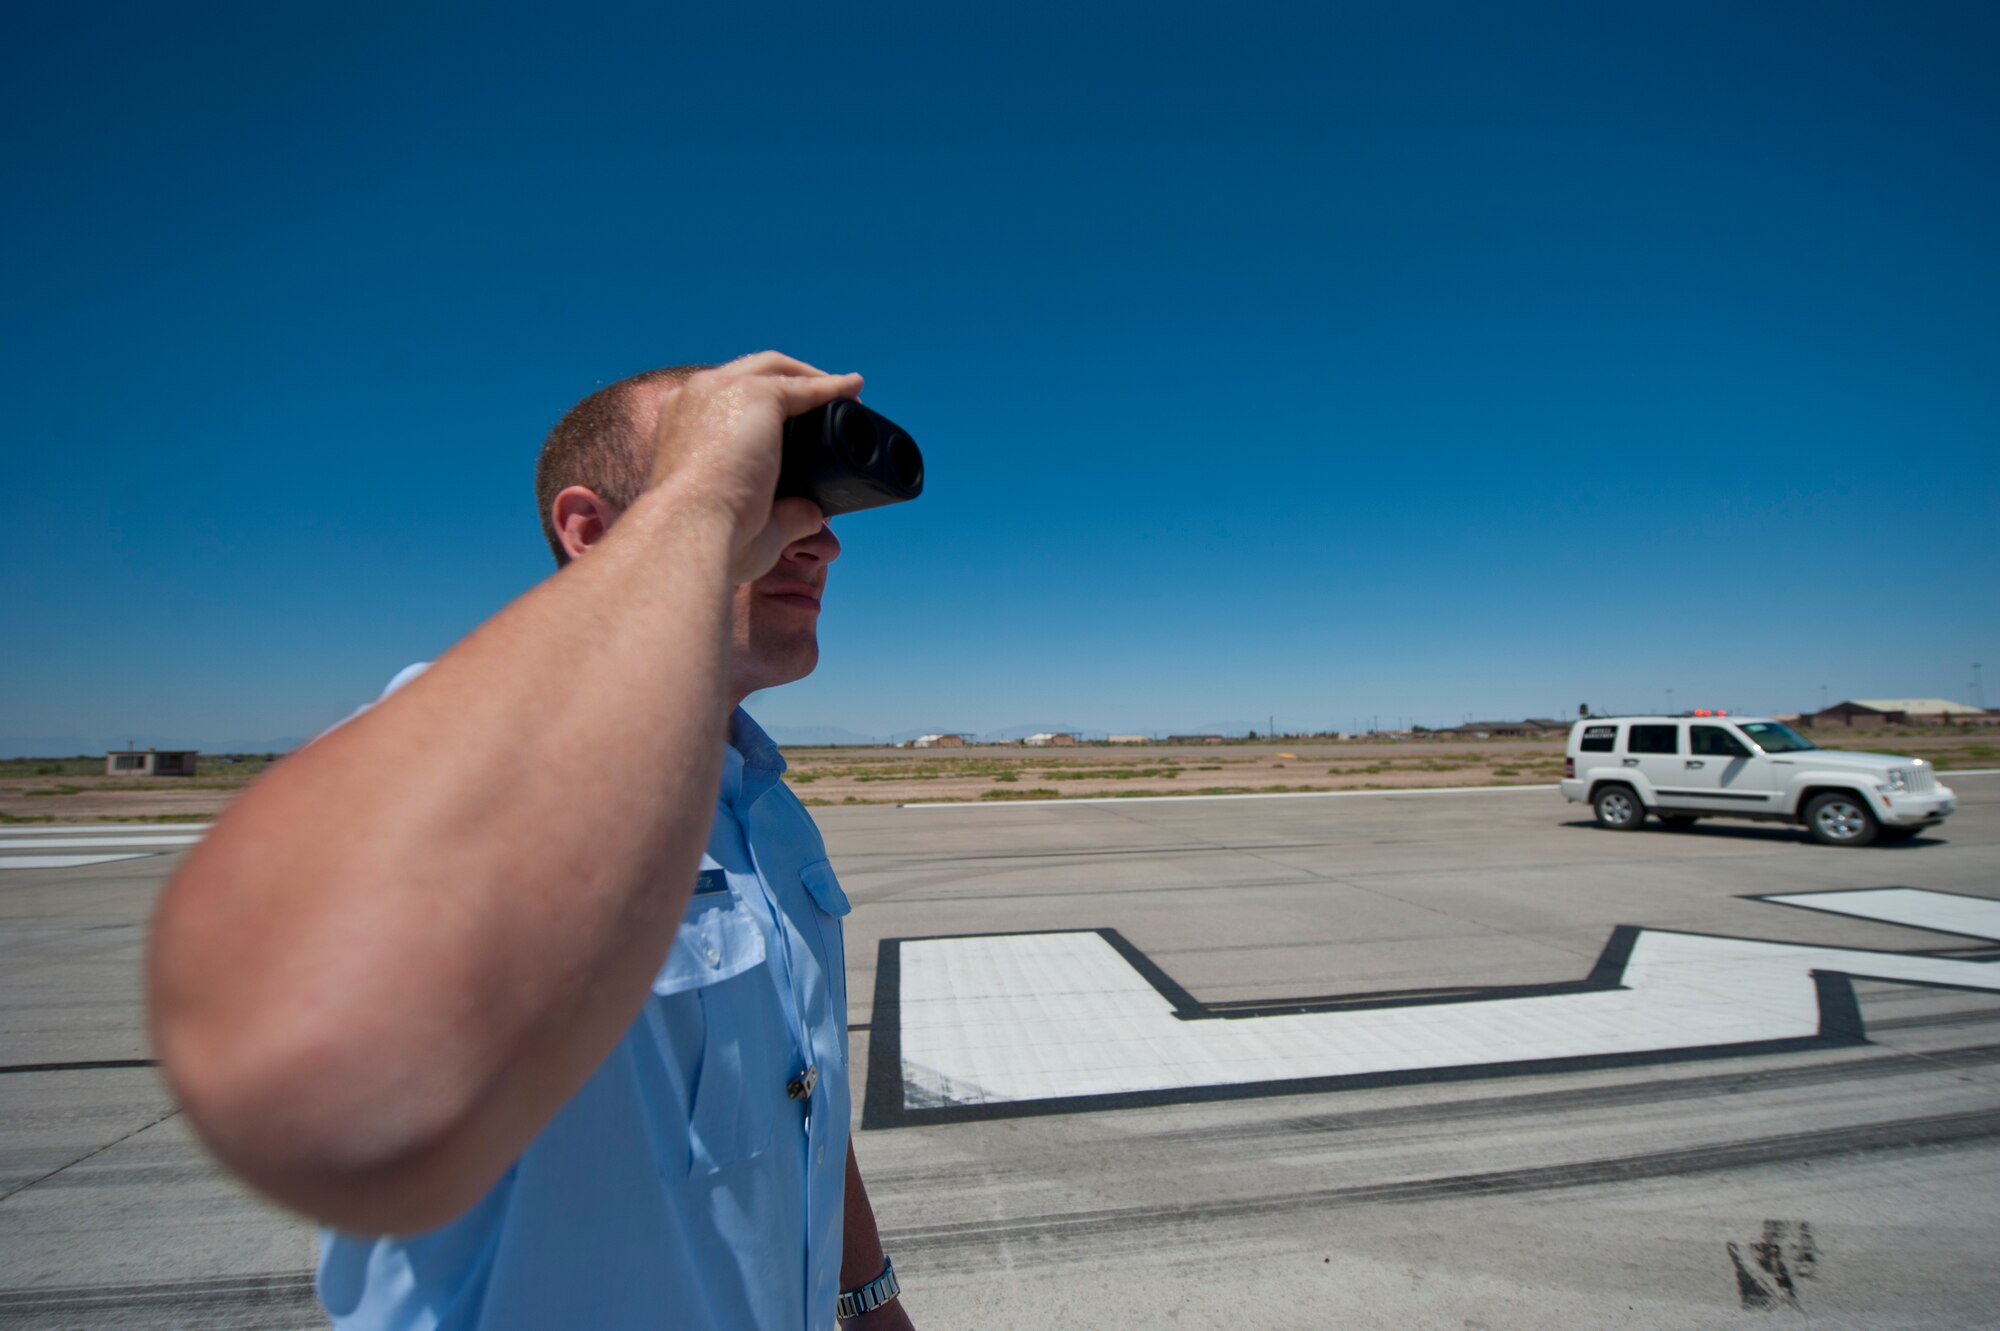 Senior Airman Christopher Proctor, 49th Operations Support Squadron airfield manager, uses a range finder to estimate the distance of objects on the airfield at Holloman Air Force Base, N.M., June 25. Airfield managers must know the exact whereabouts of all incoming and outgoing aircraft on the airfield. (U.S. Air Force photo by Airman 1st Class Daniel E. Liddicoet/Released)